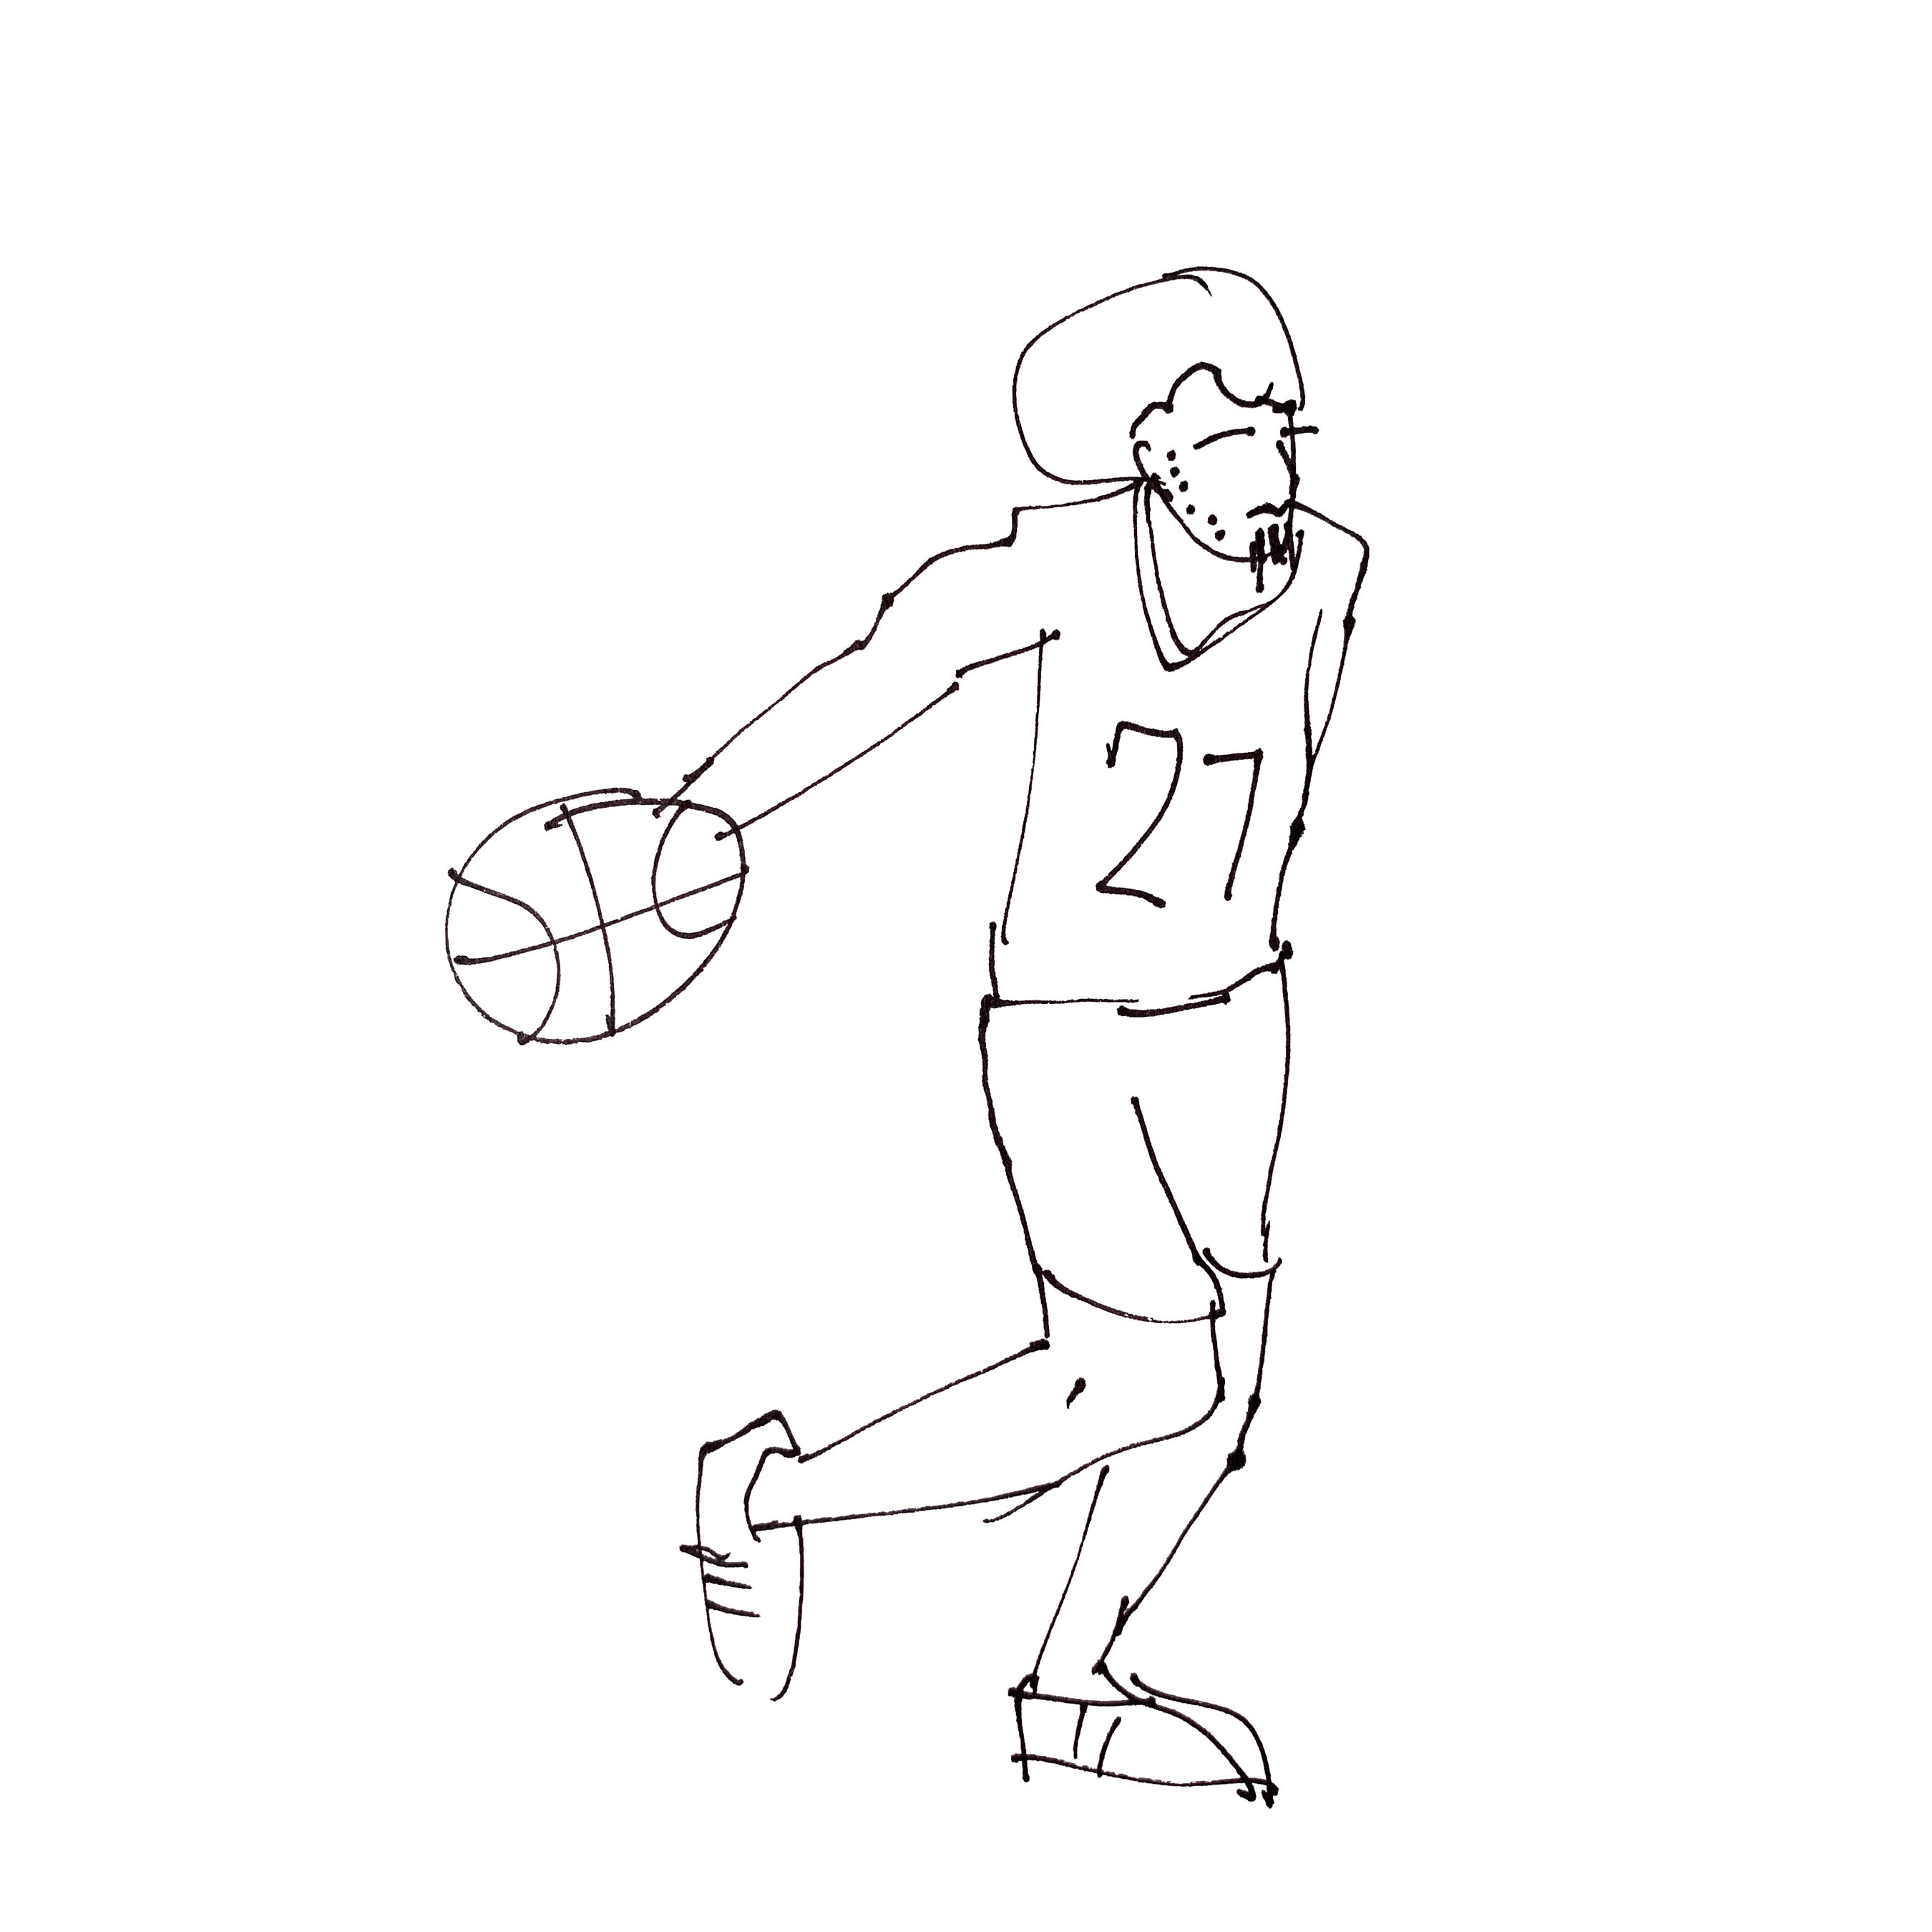 art every day number 601 illustration sketch drawing basketball